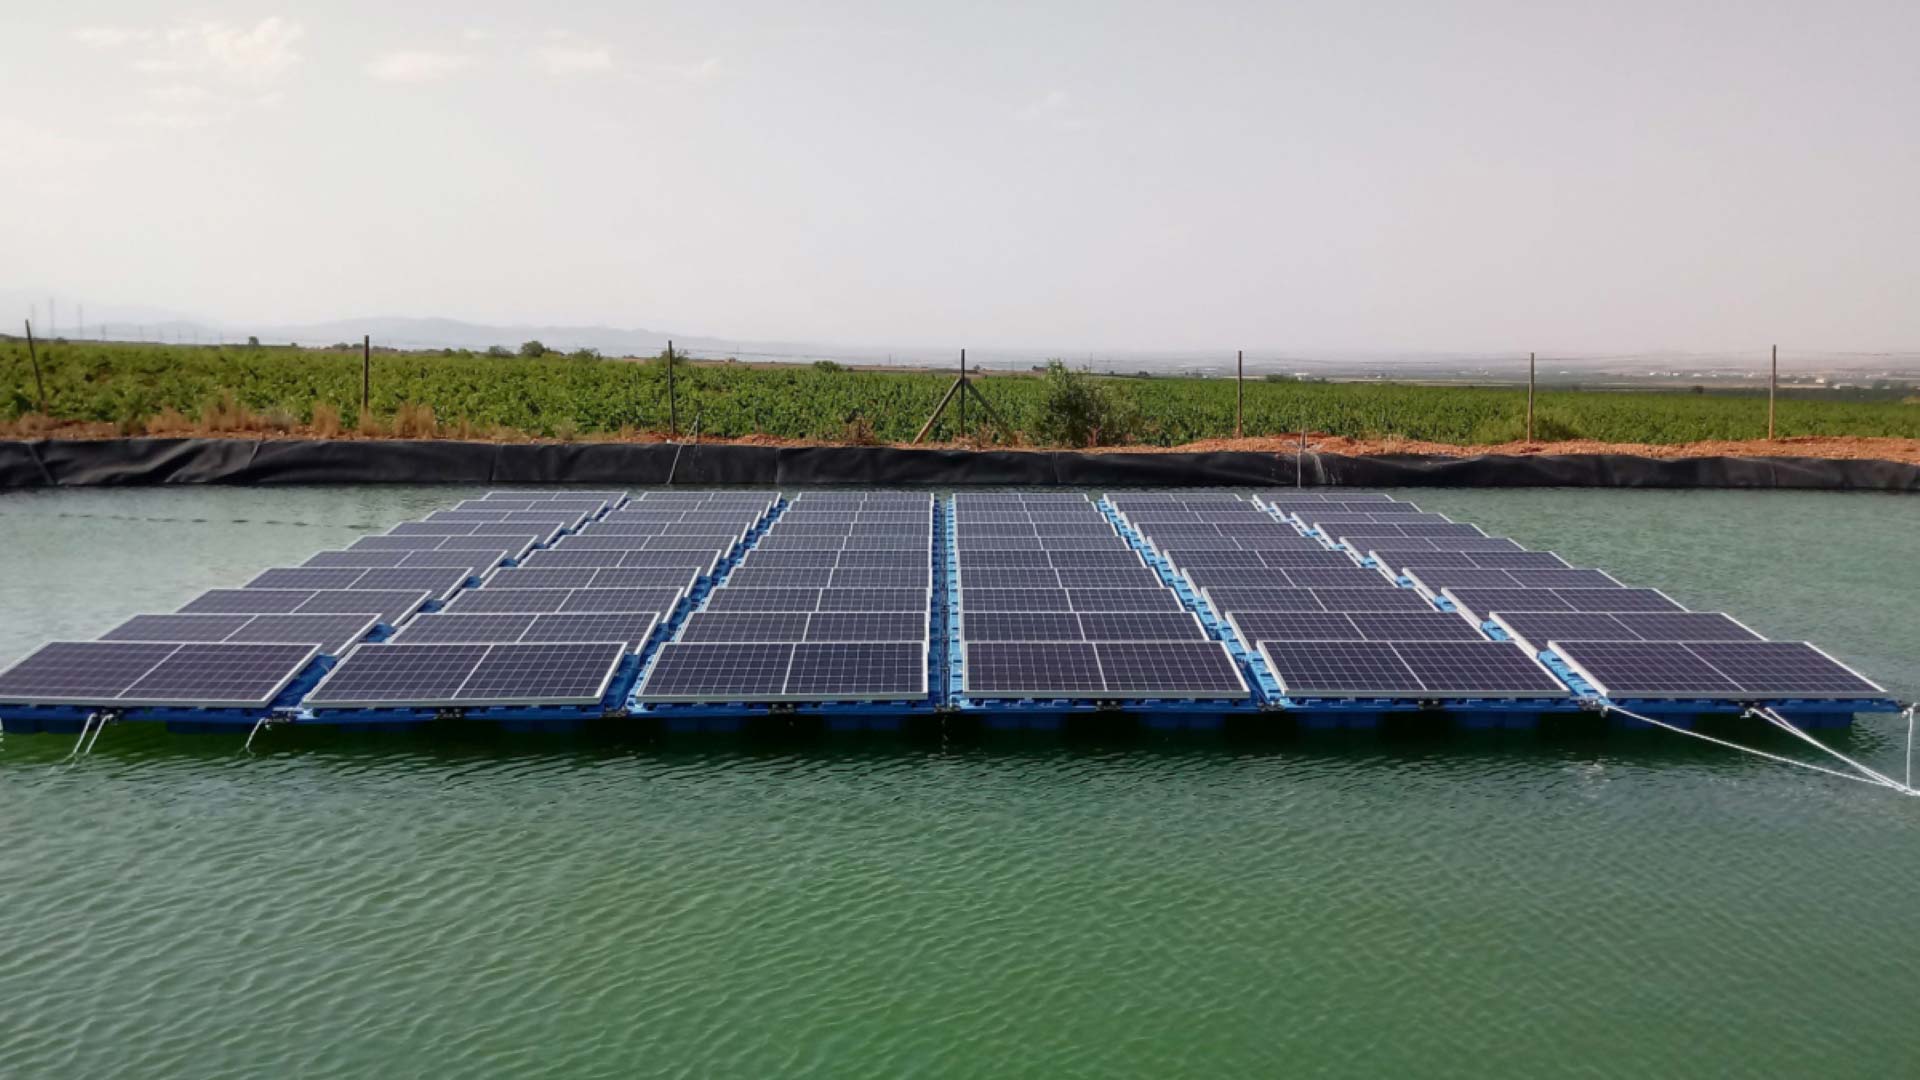 Floating photovoltaic systems